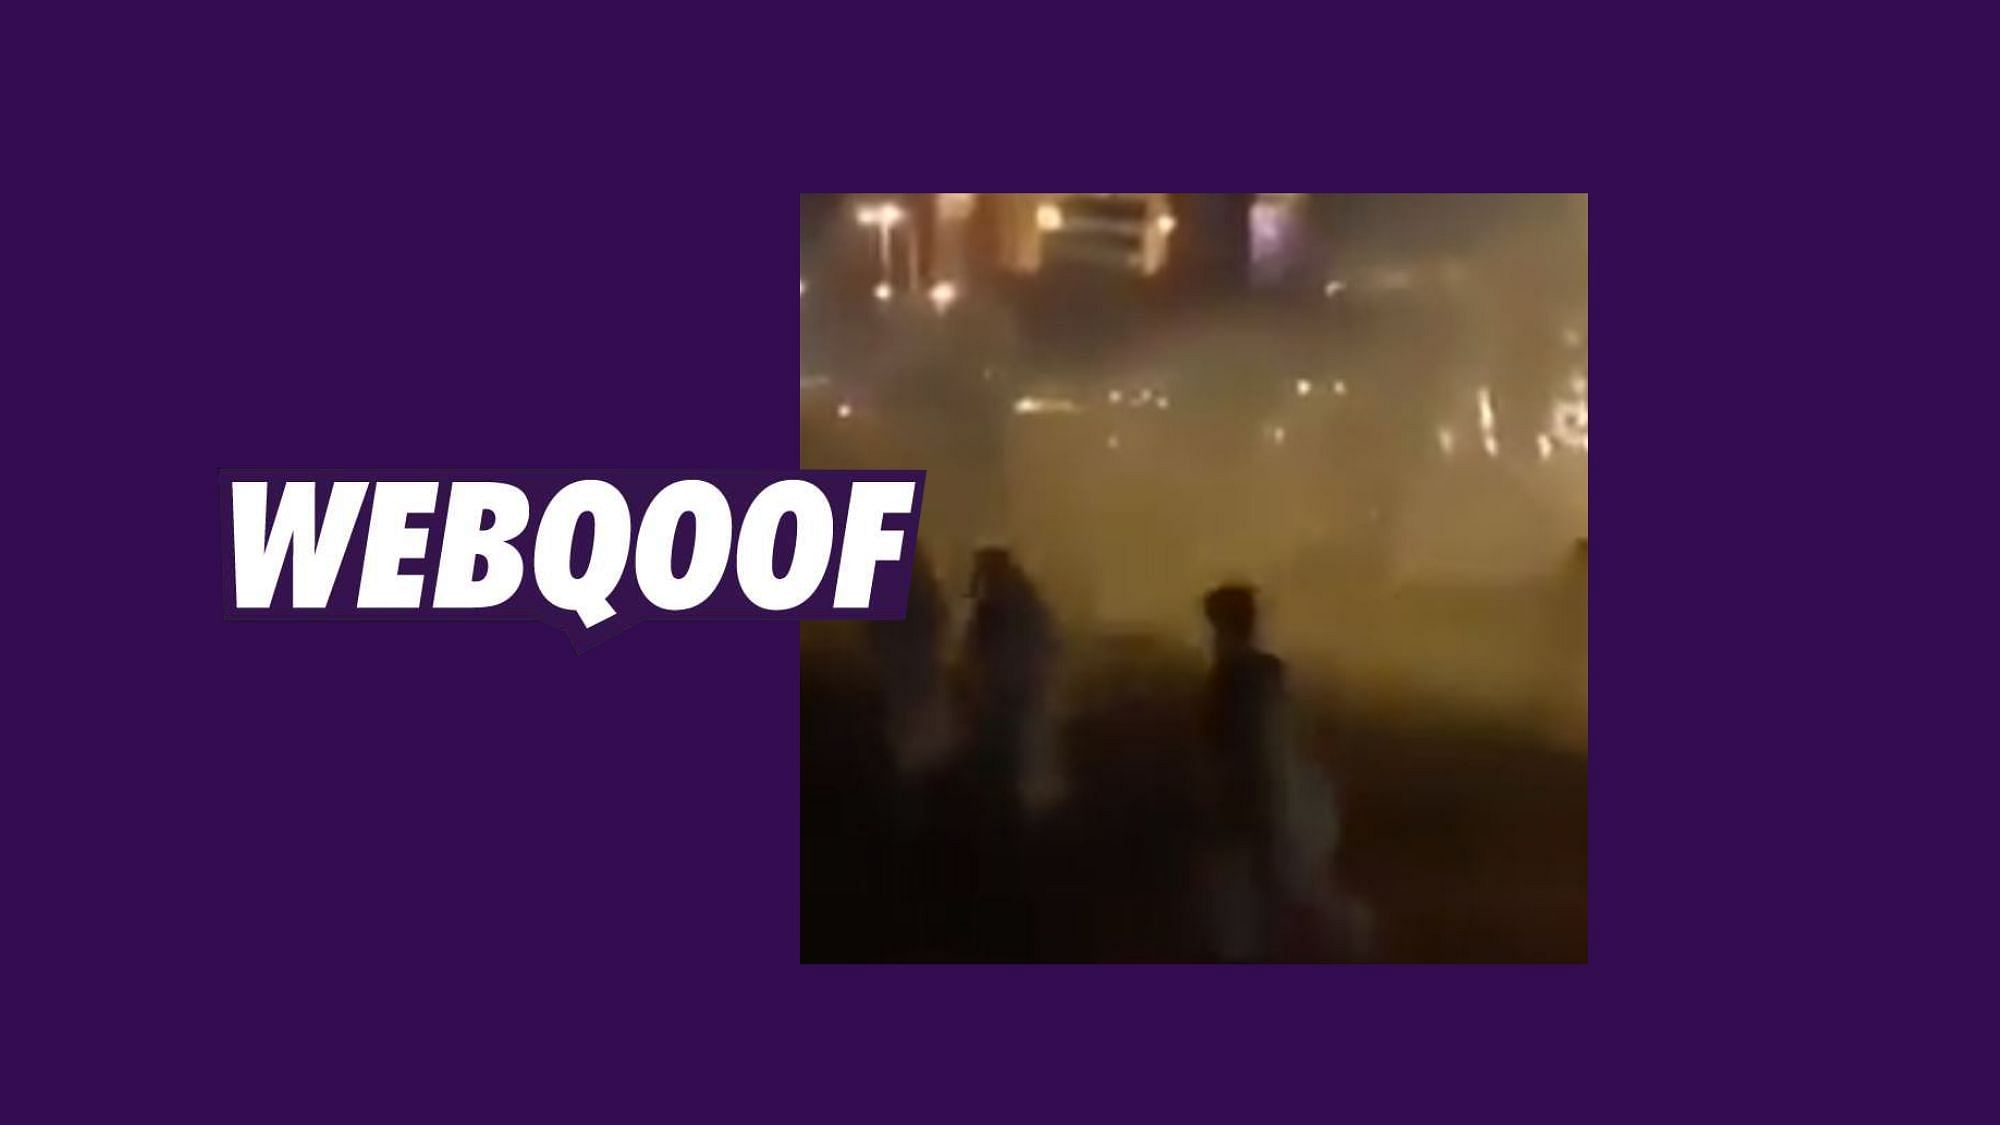 The posts along the old video falsely claimed an explosion took place at the Halal Disco in Jeddah Saudi Arabia.